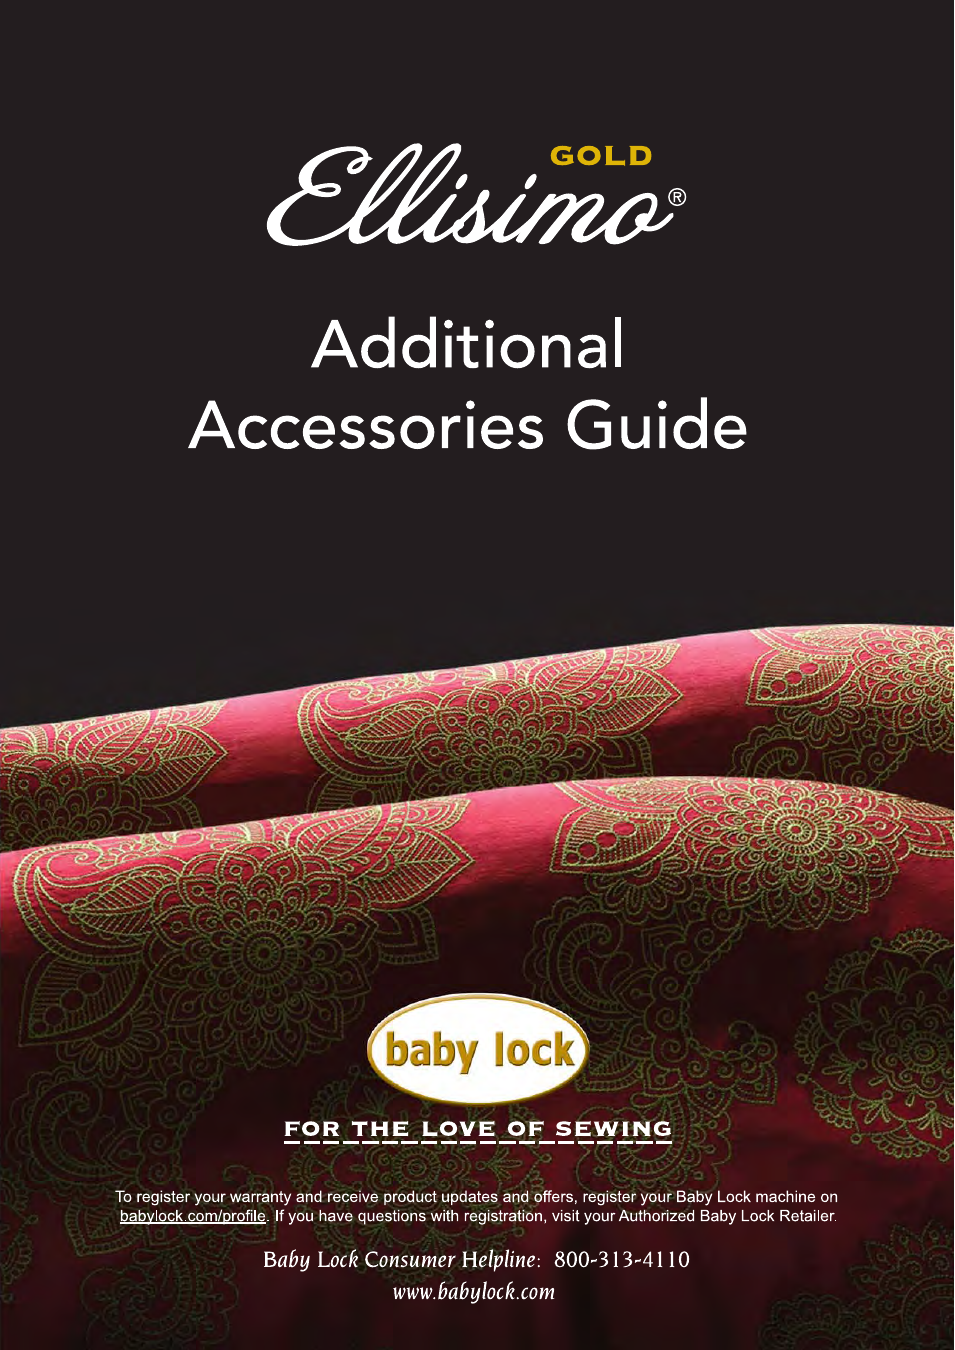 Ellegante 2 (Previous Model) (BLG2) Additional Accessories Guide (Page 1)